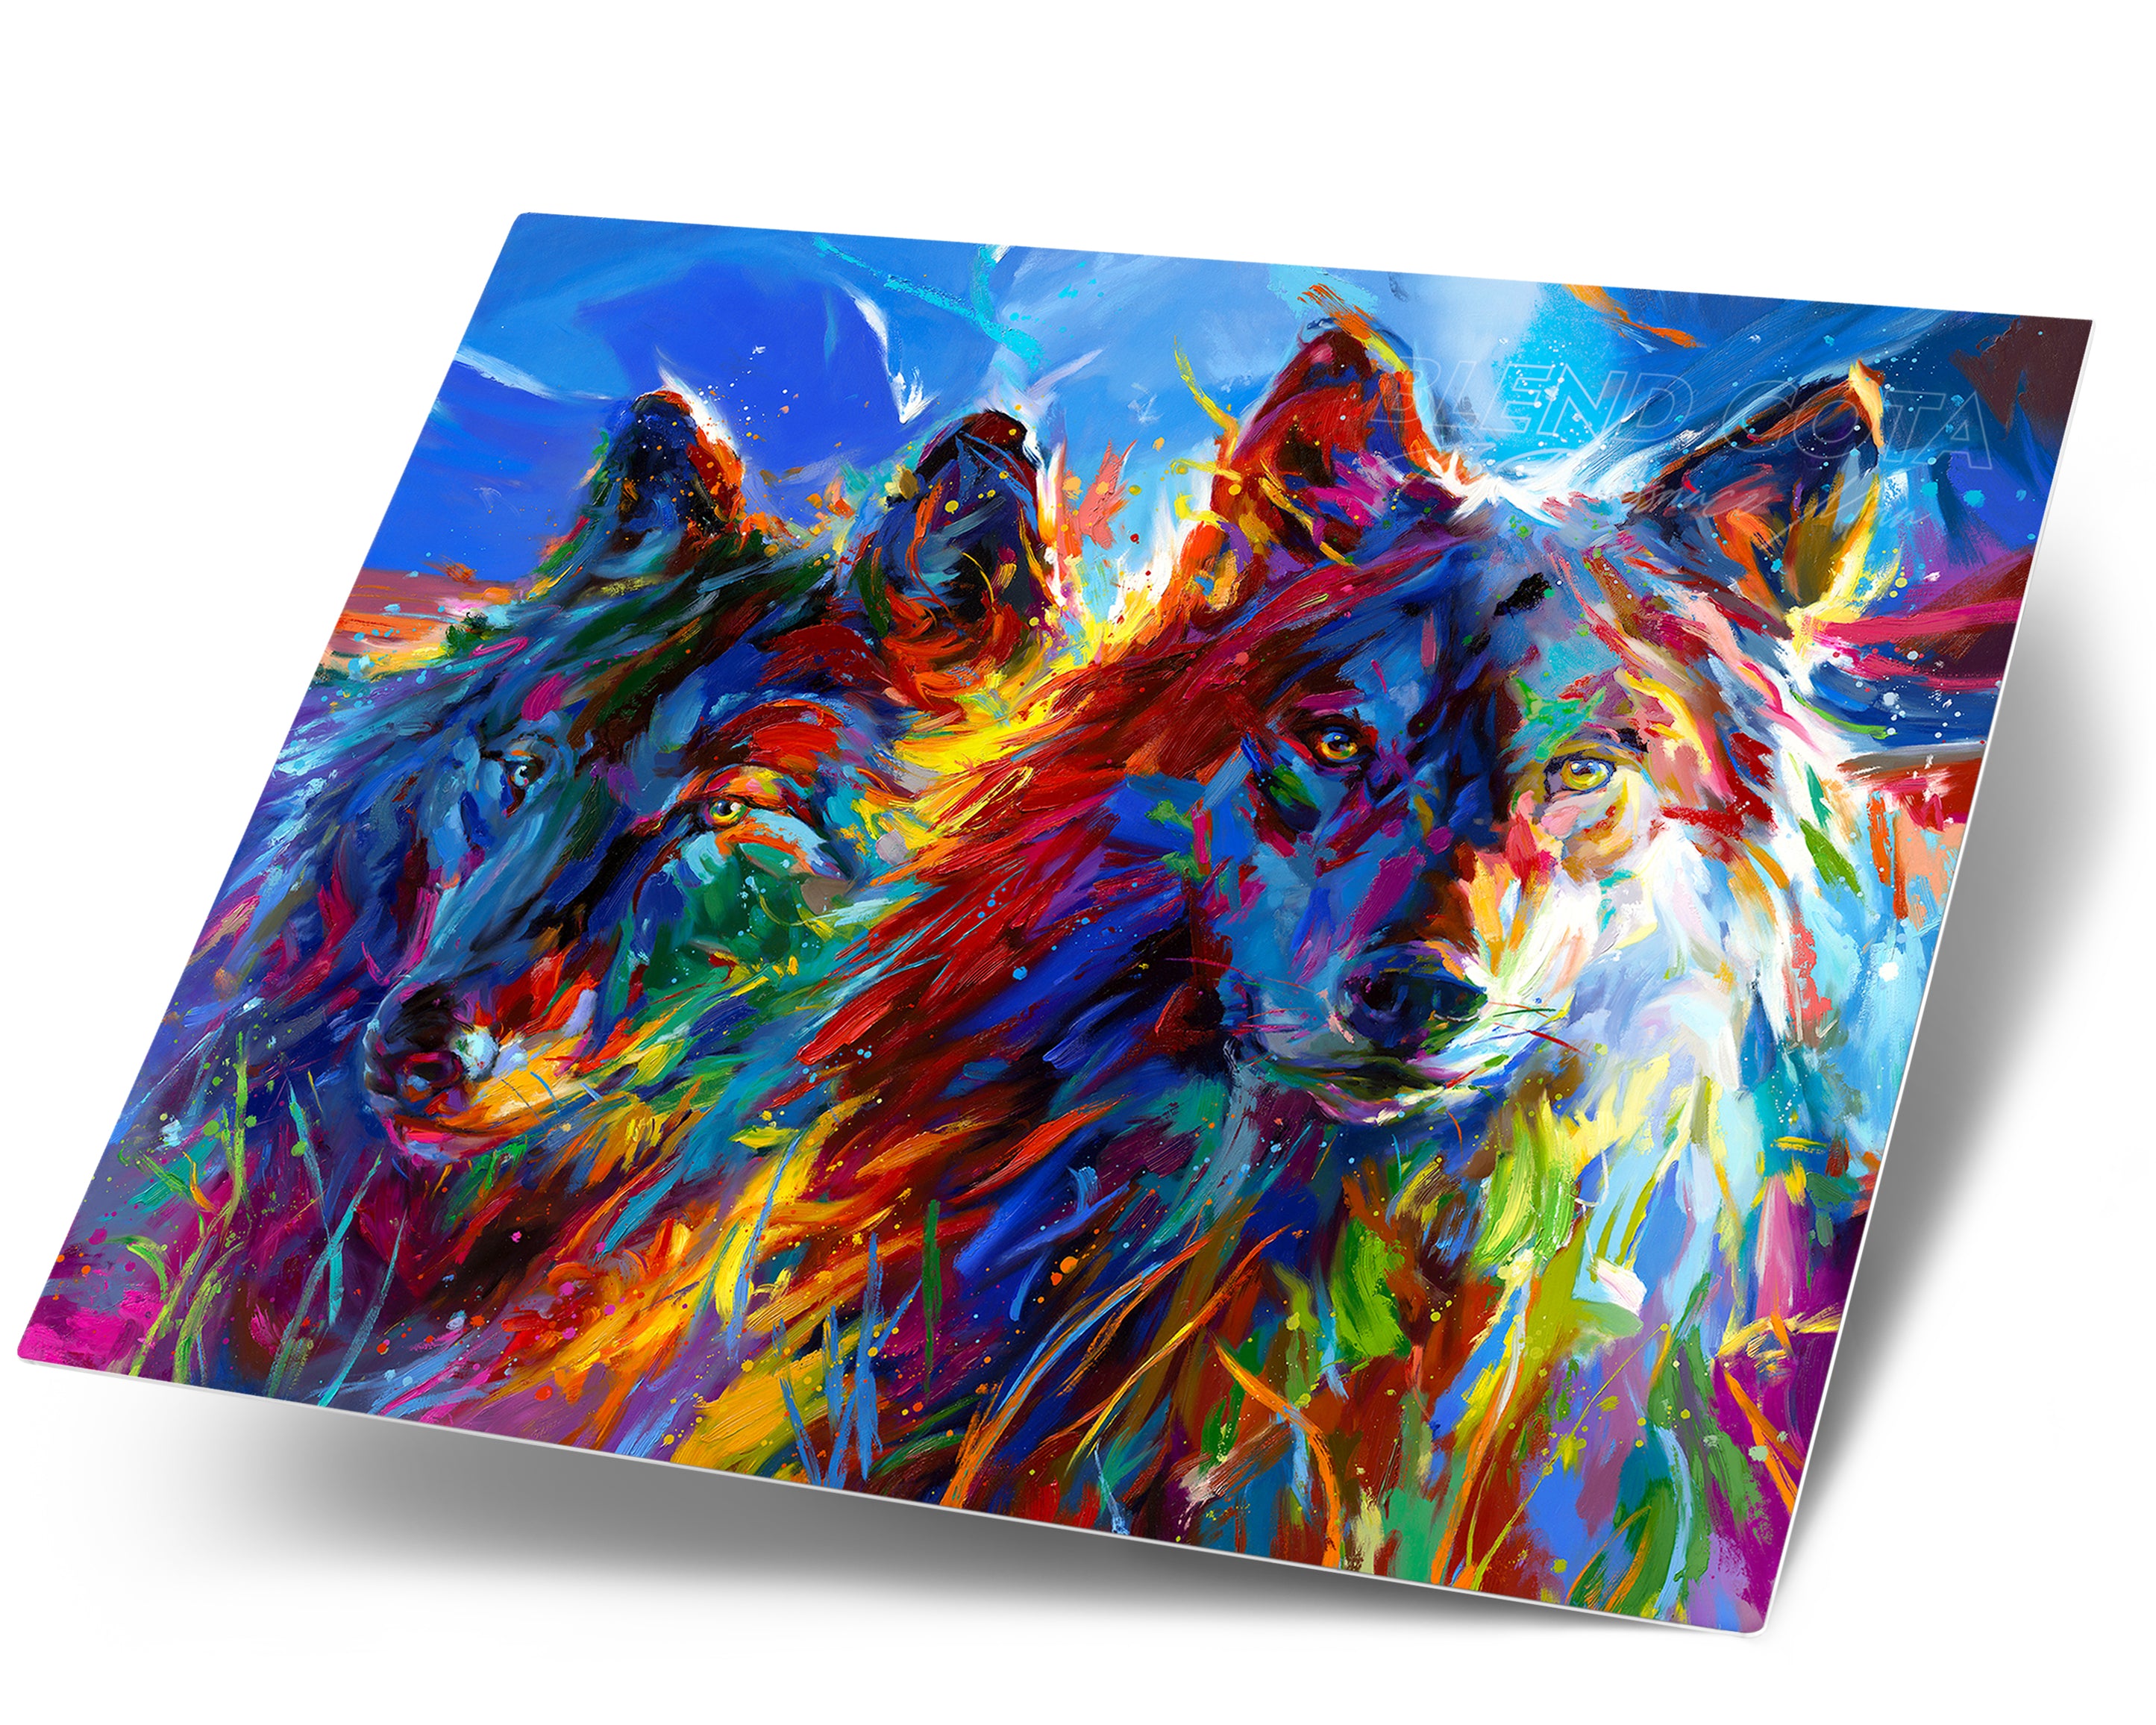 Wolves True Love painted by Blend Cota Art Print on Metal from Blend Cota Studios 